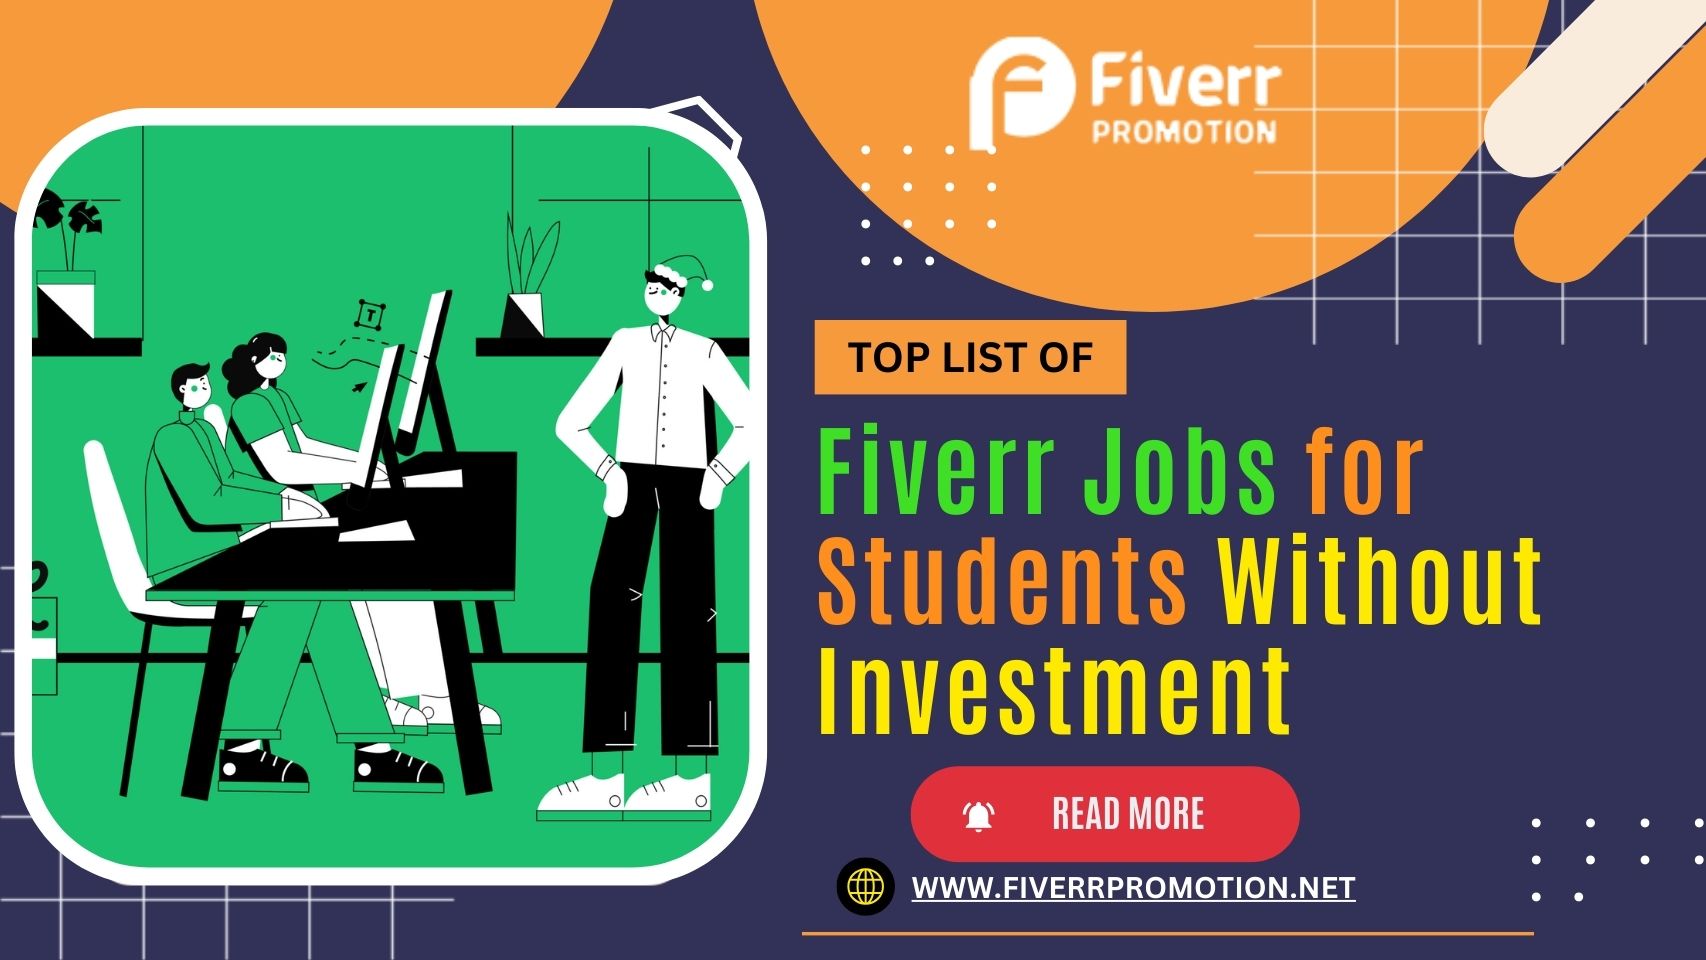 Top List of Fiverr Jobs for Students Without Investment